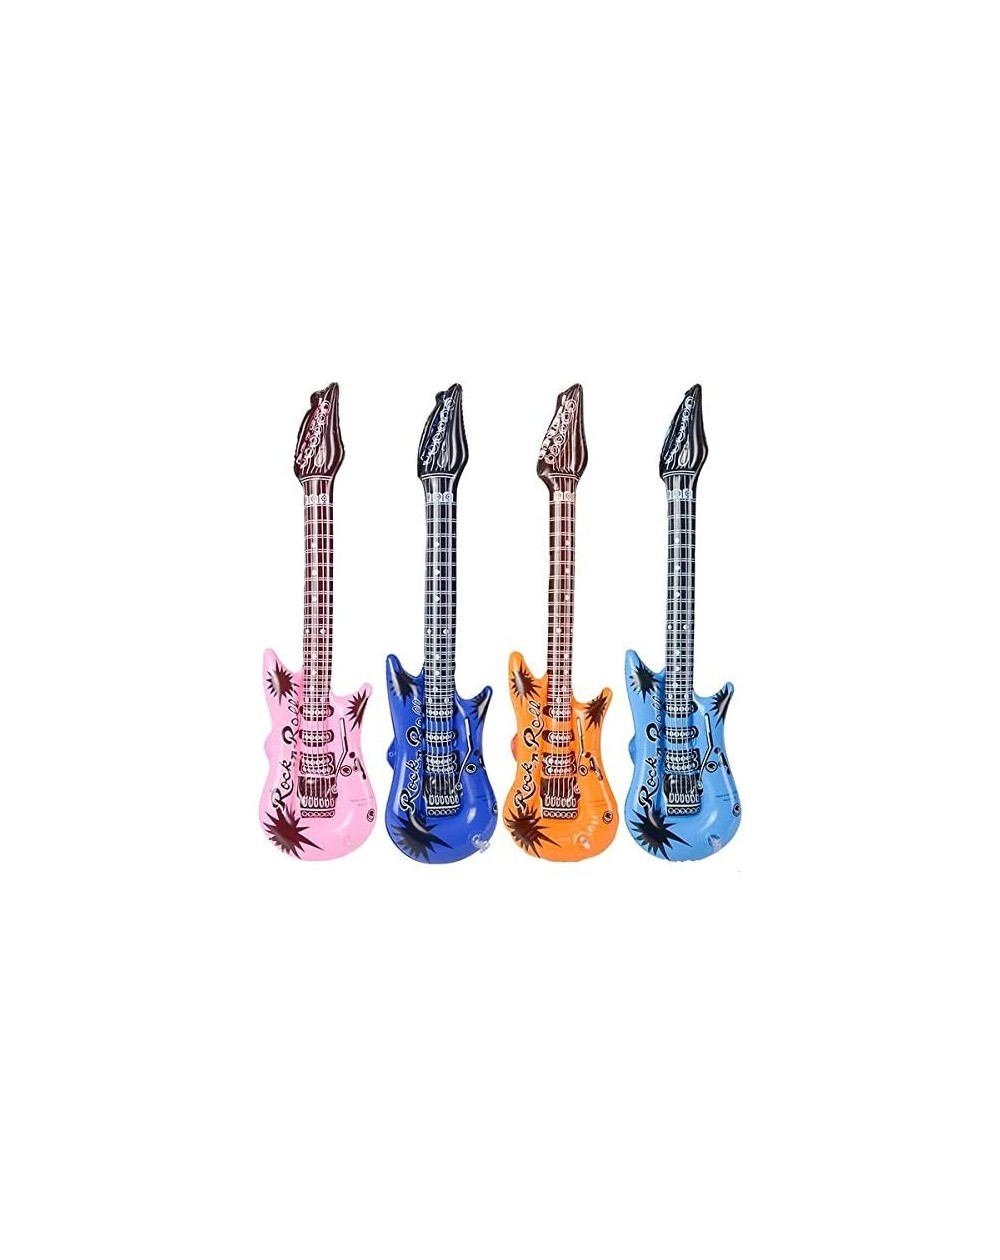 Party Favors 24 Inch Rock Guitar Inflatables- One Dozen - CI112I11267 $9.75